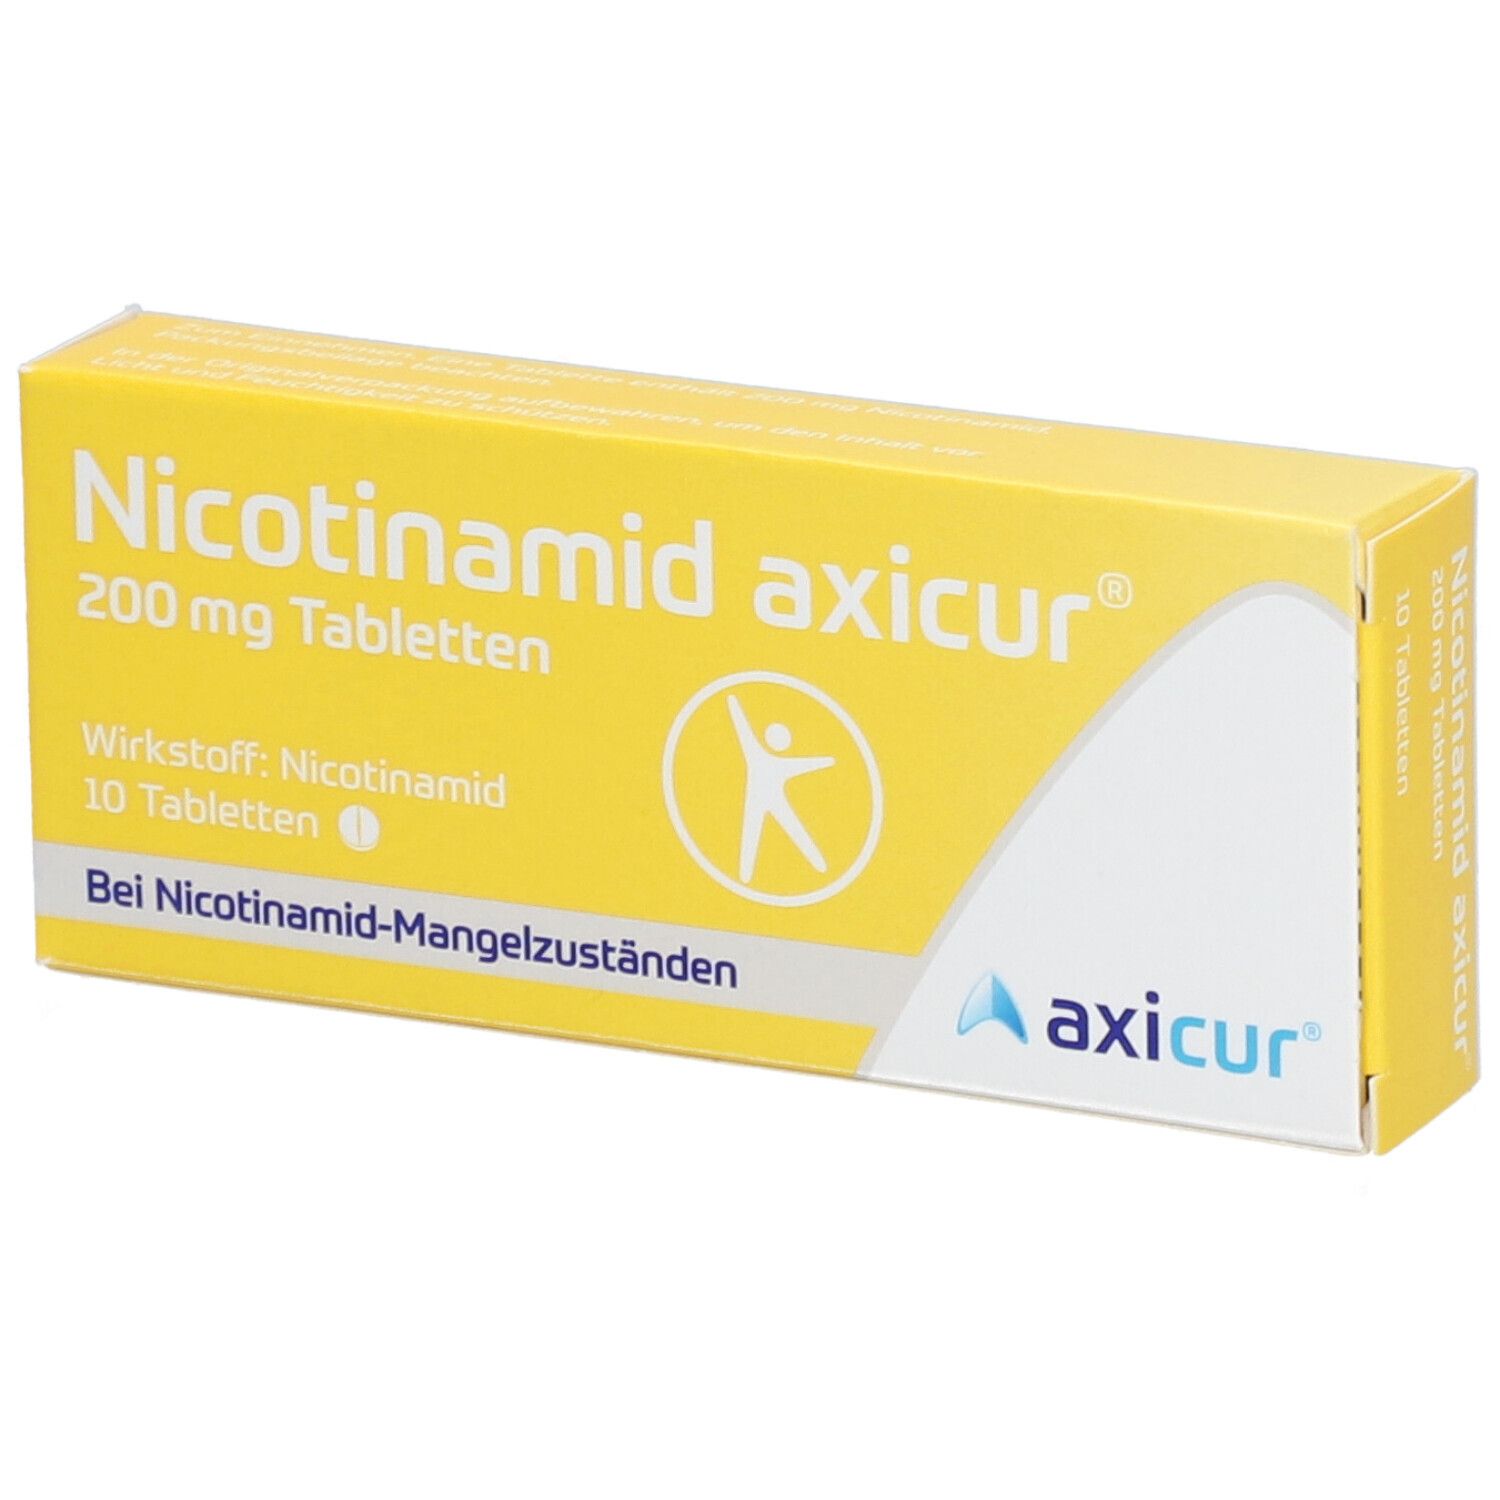 Nicotinamid axicur® 200 mg Tabletten